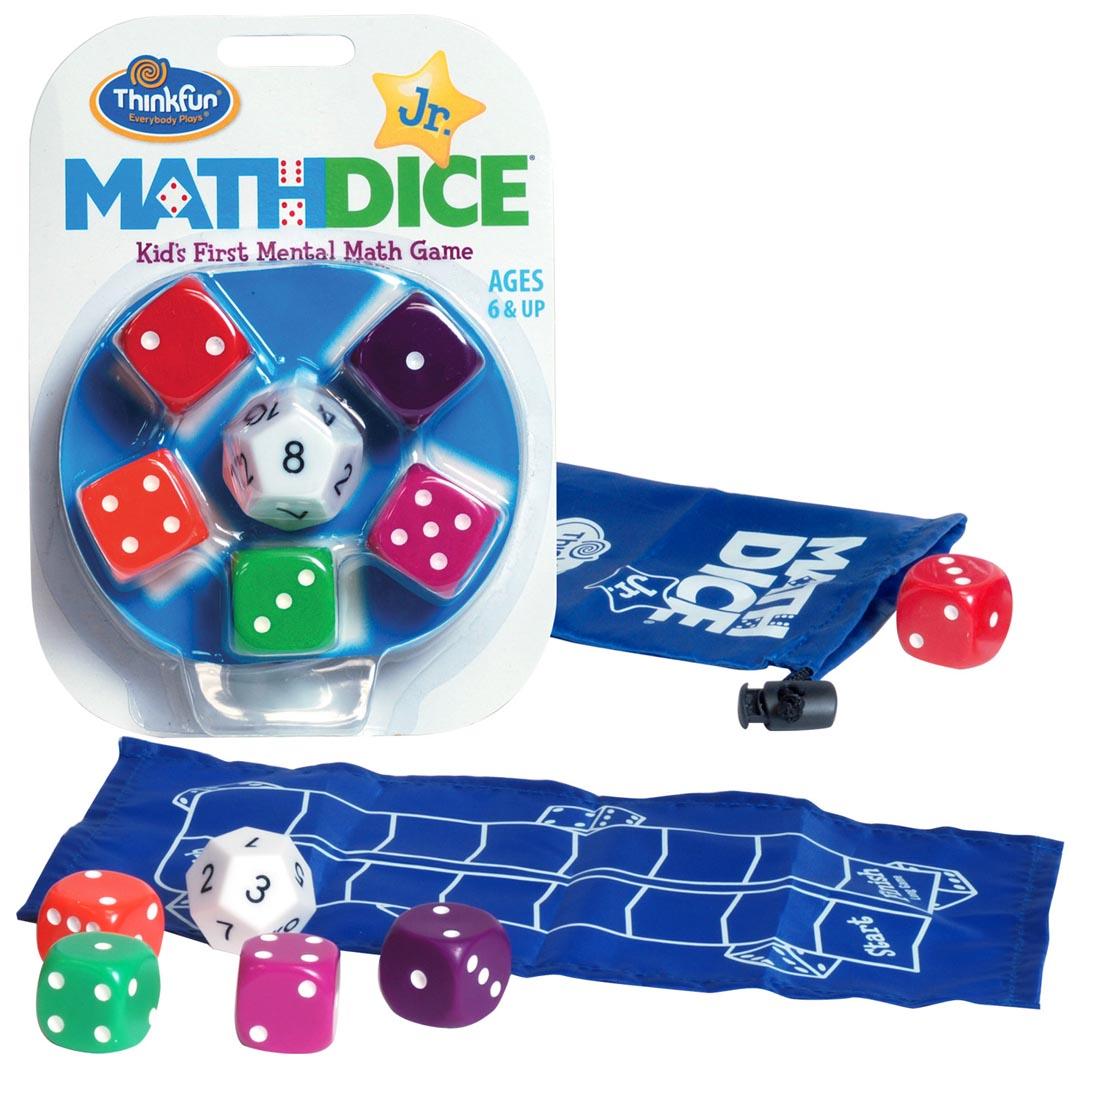 Thinkfun MathDice Jr. Game shown both in and out of package